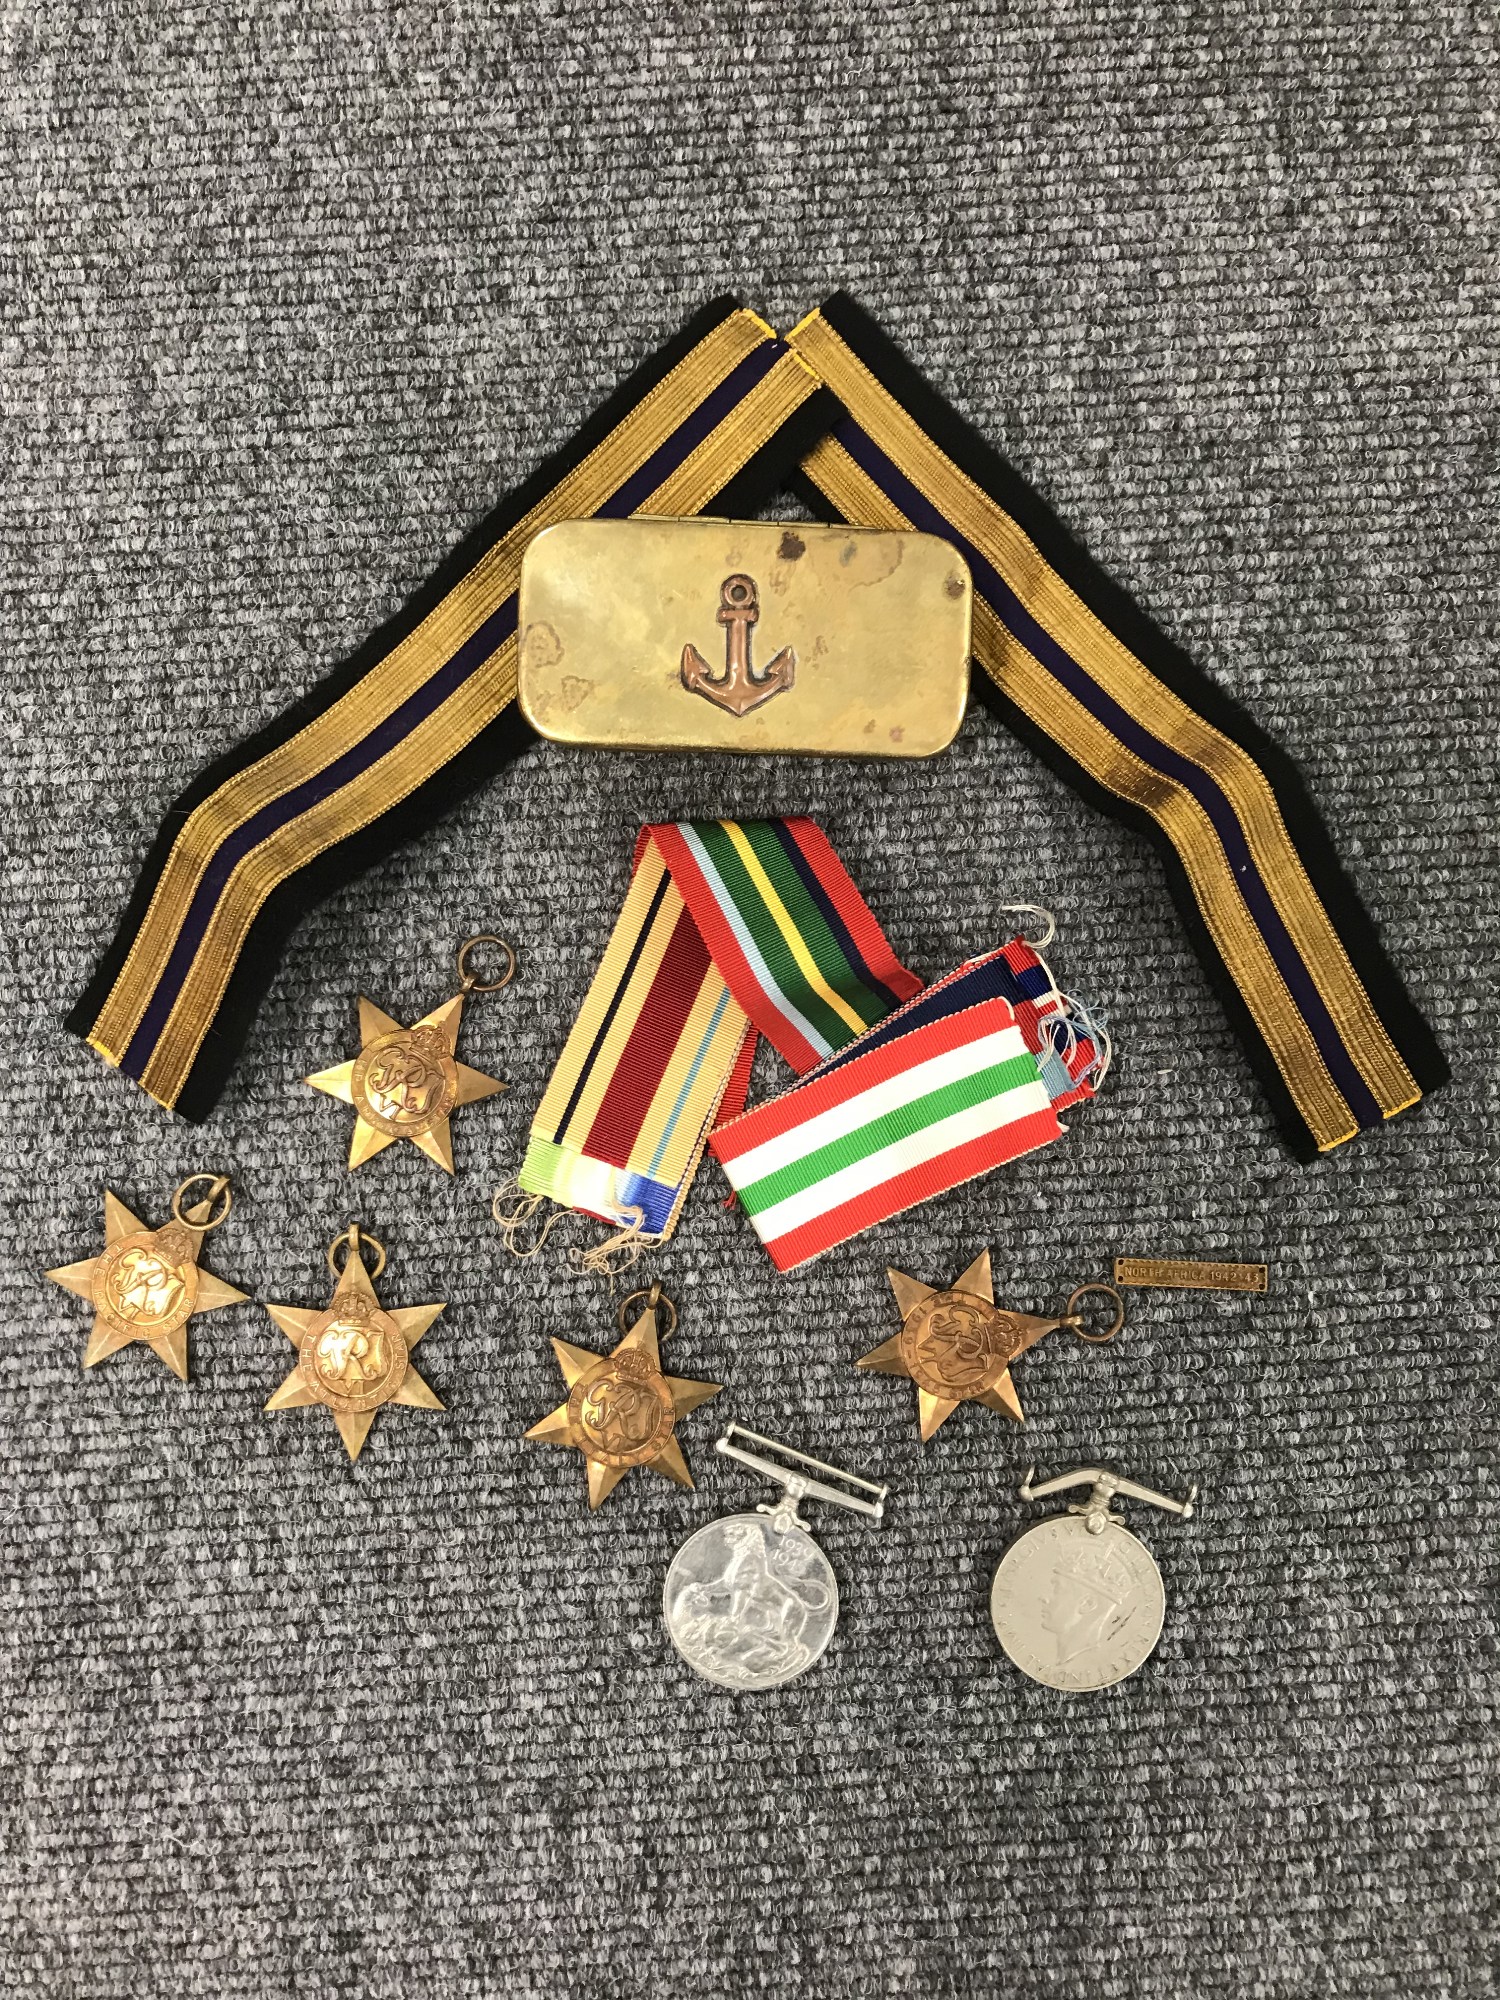 A collection of seven Second World War medals with ribbons including Italy star, Atlantic star,